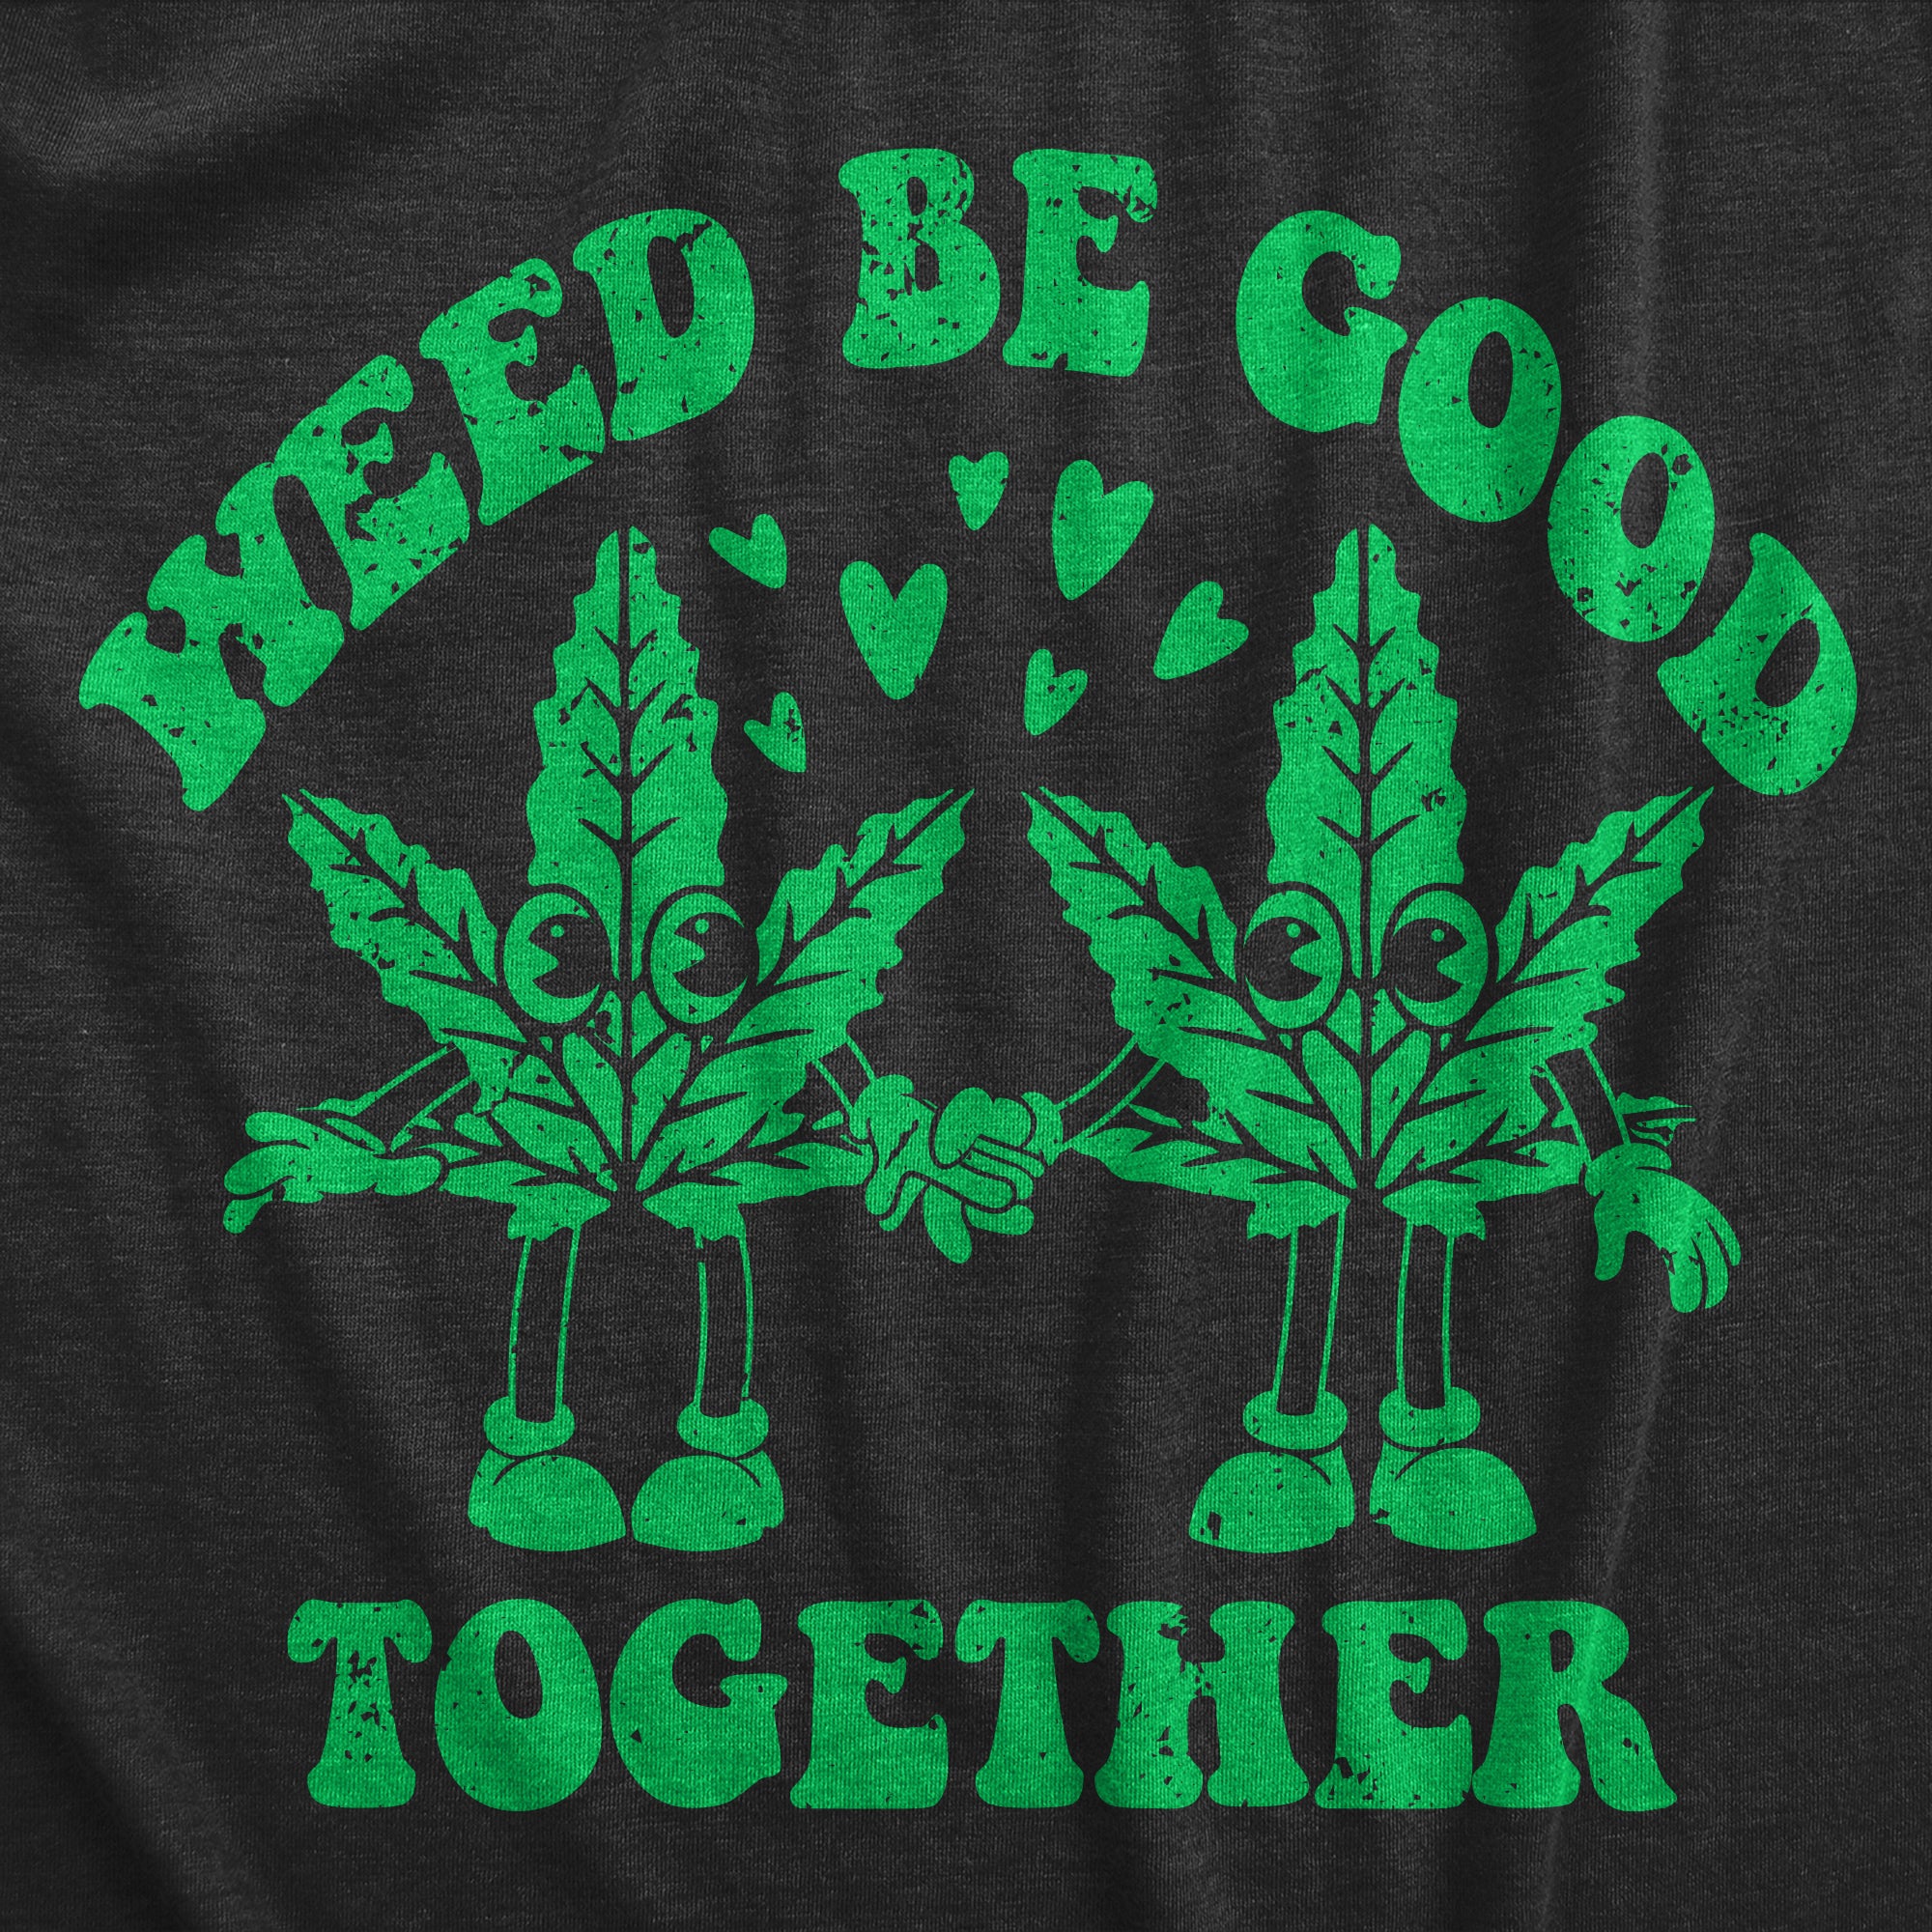 Funny Heather Black - Weed Be Good Together Weed Be Good Together Mens T Shirt Nerdy 420 sarcastic Tee